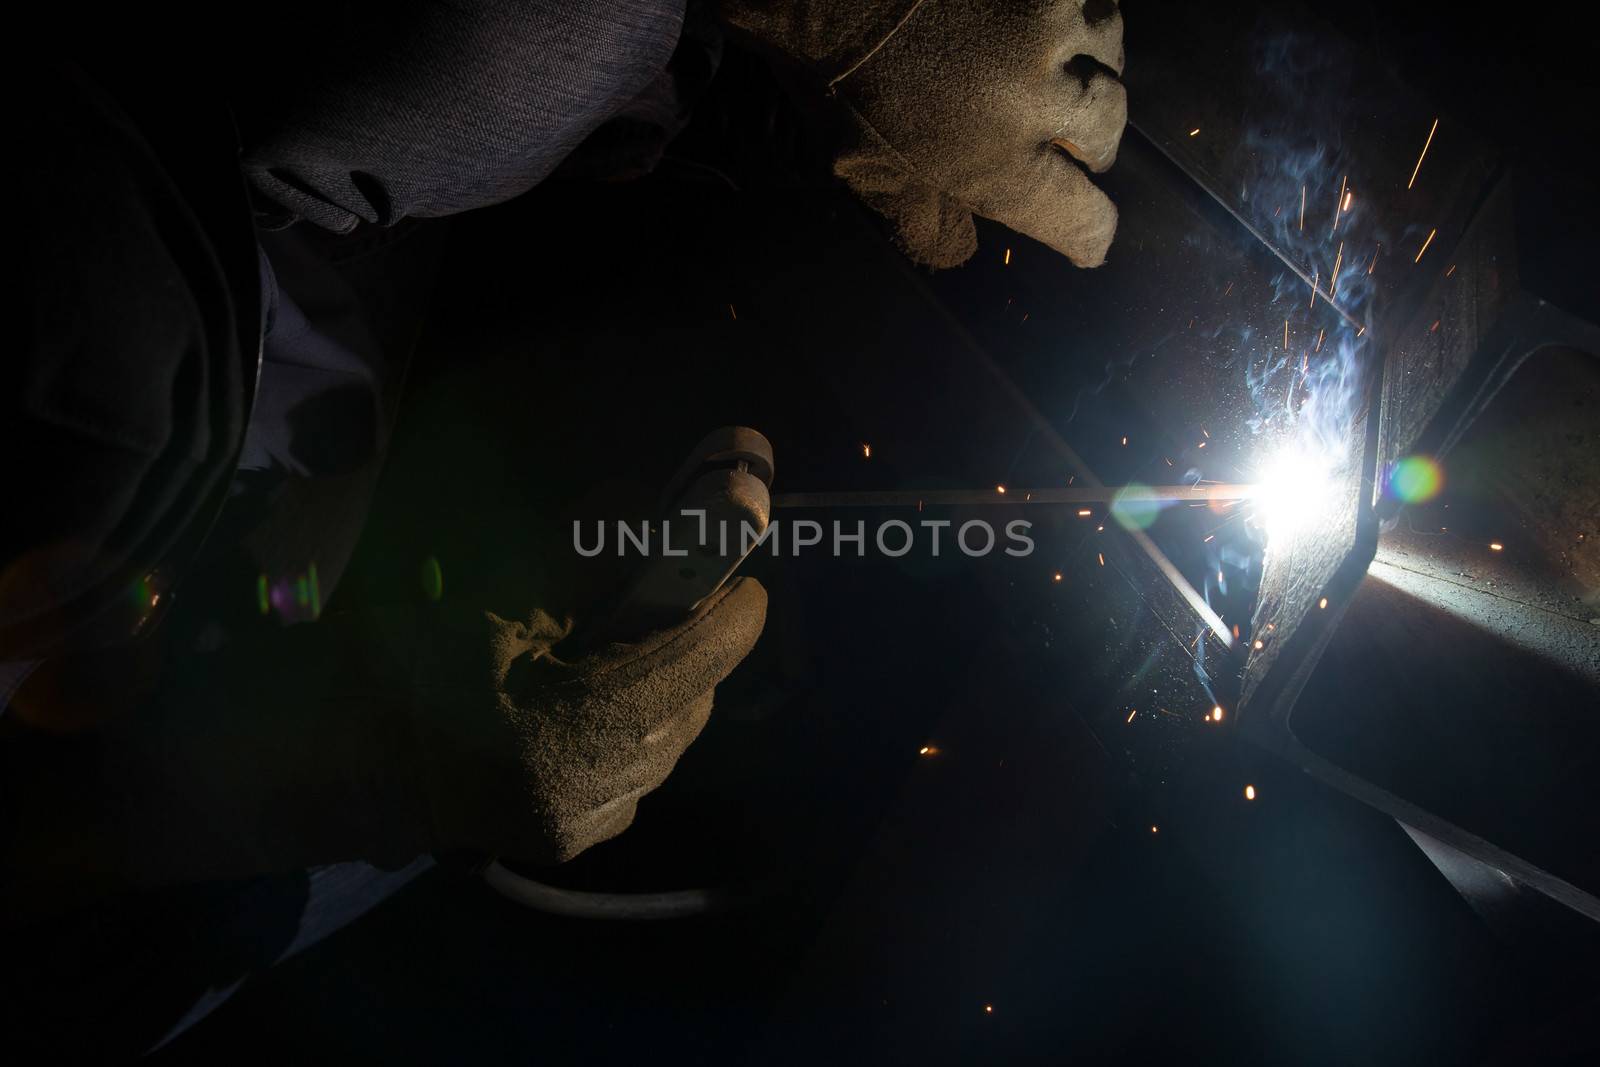 Arc welder with welding sparks by theerapoll